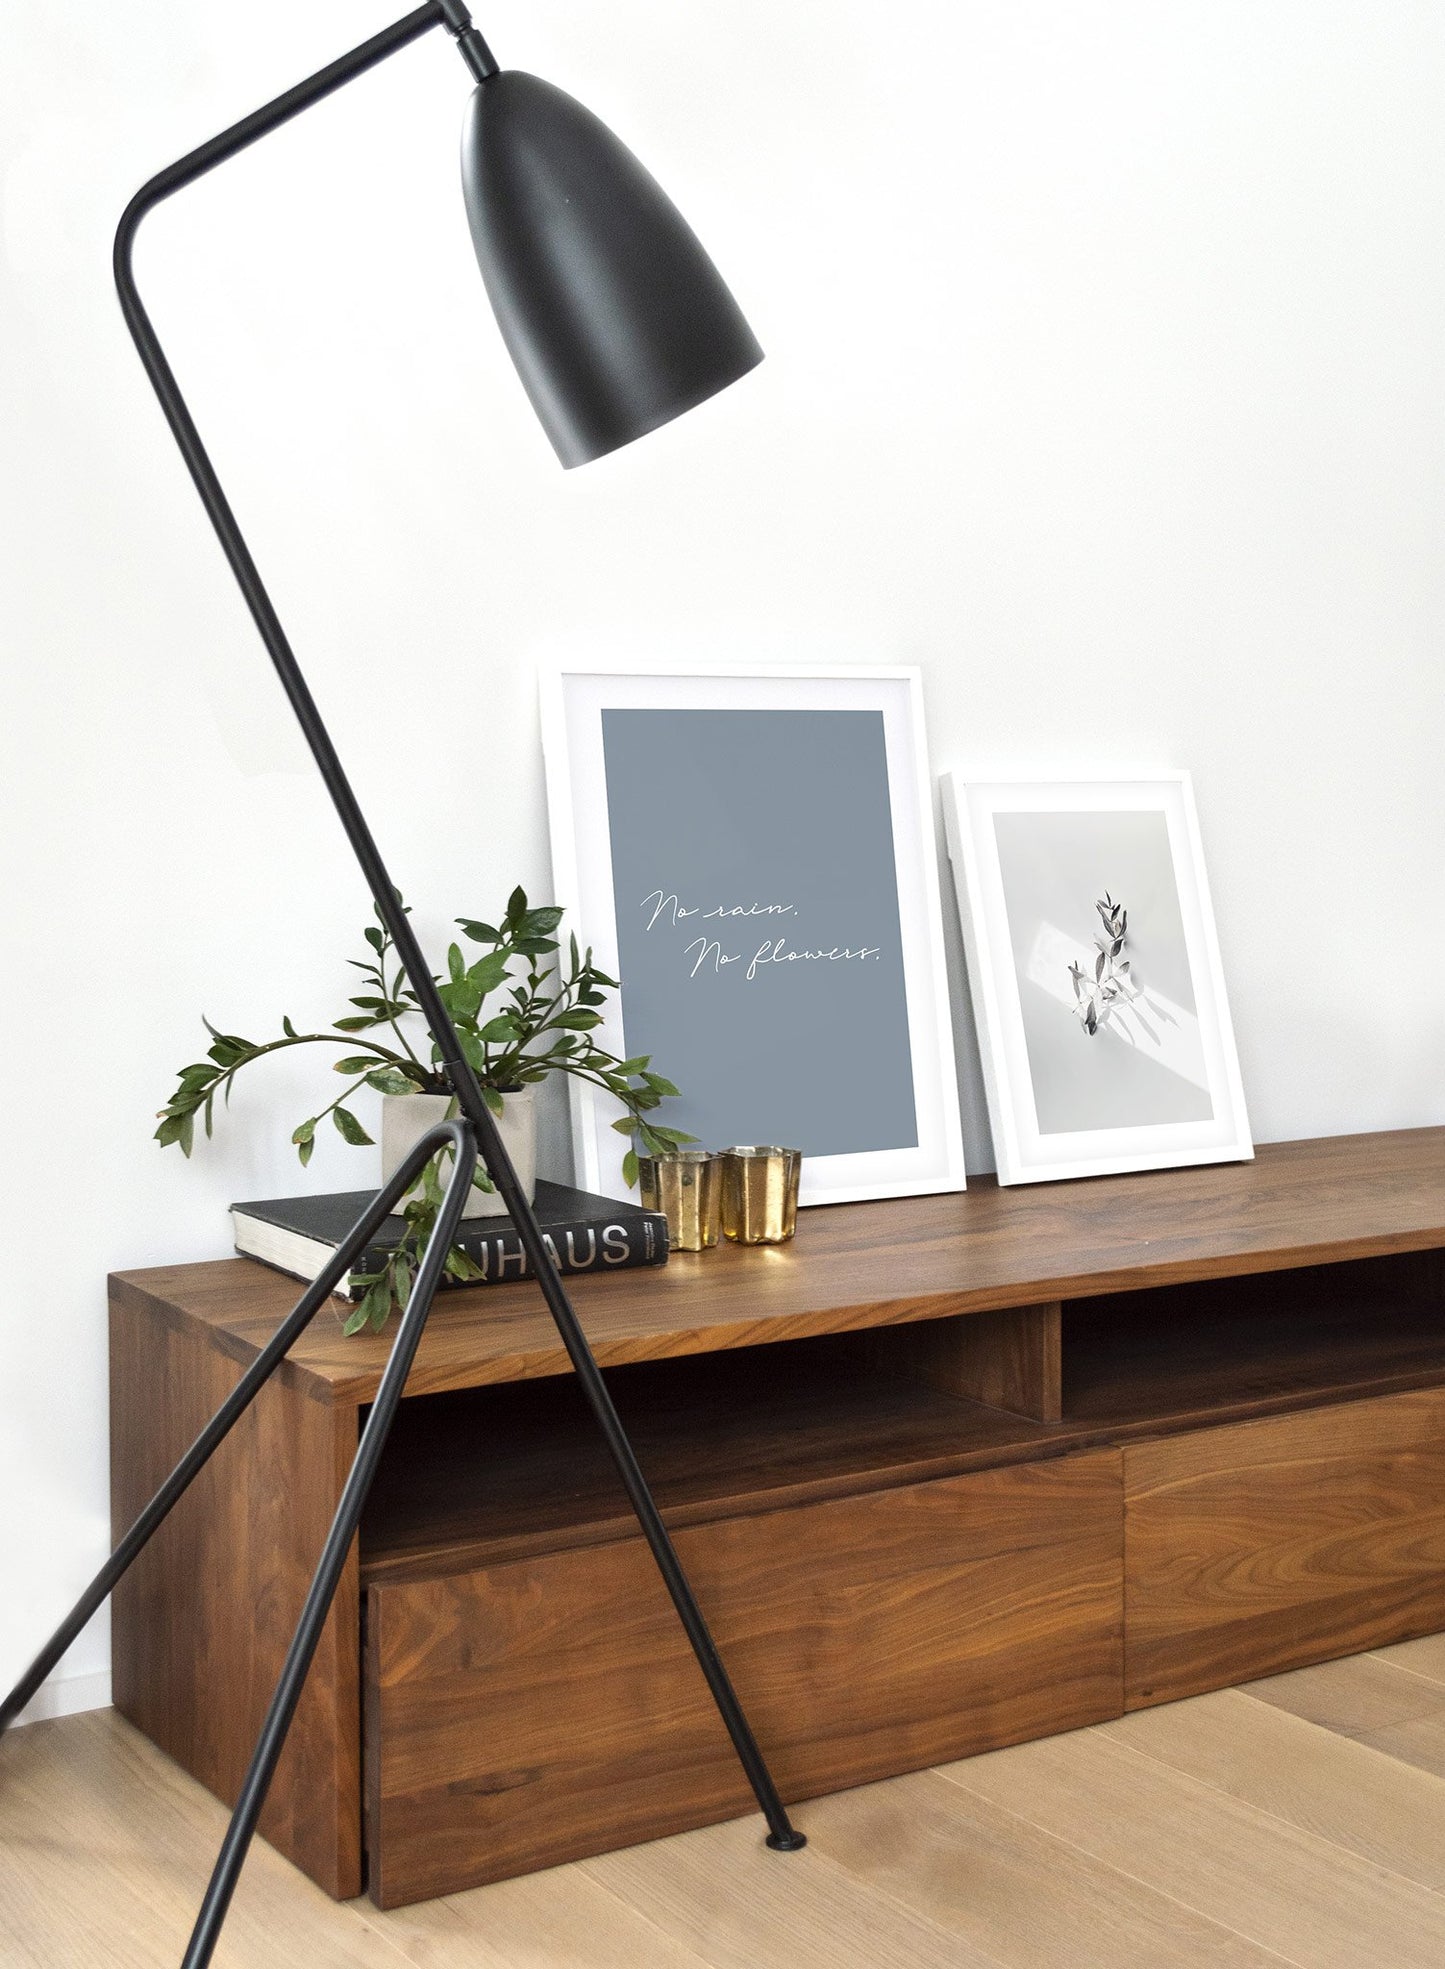 Modern minimalist photography print by Opposite Wall with single leaf in sunlight - Lifestyle Duo - Living Room